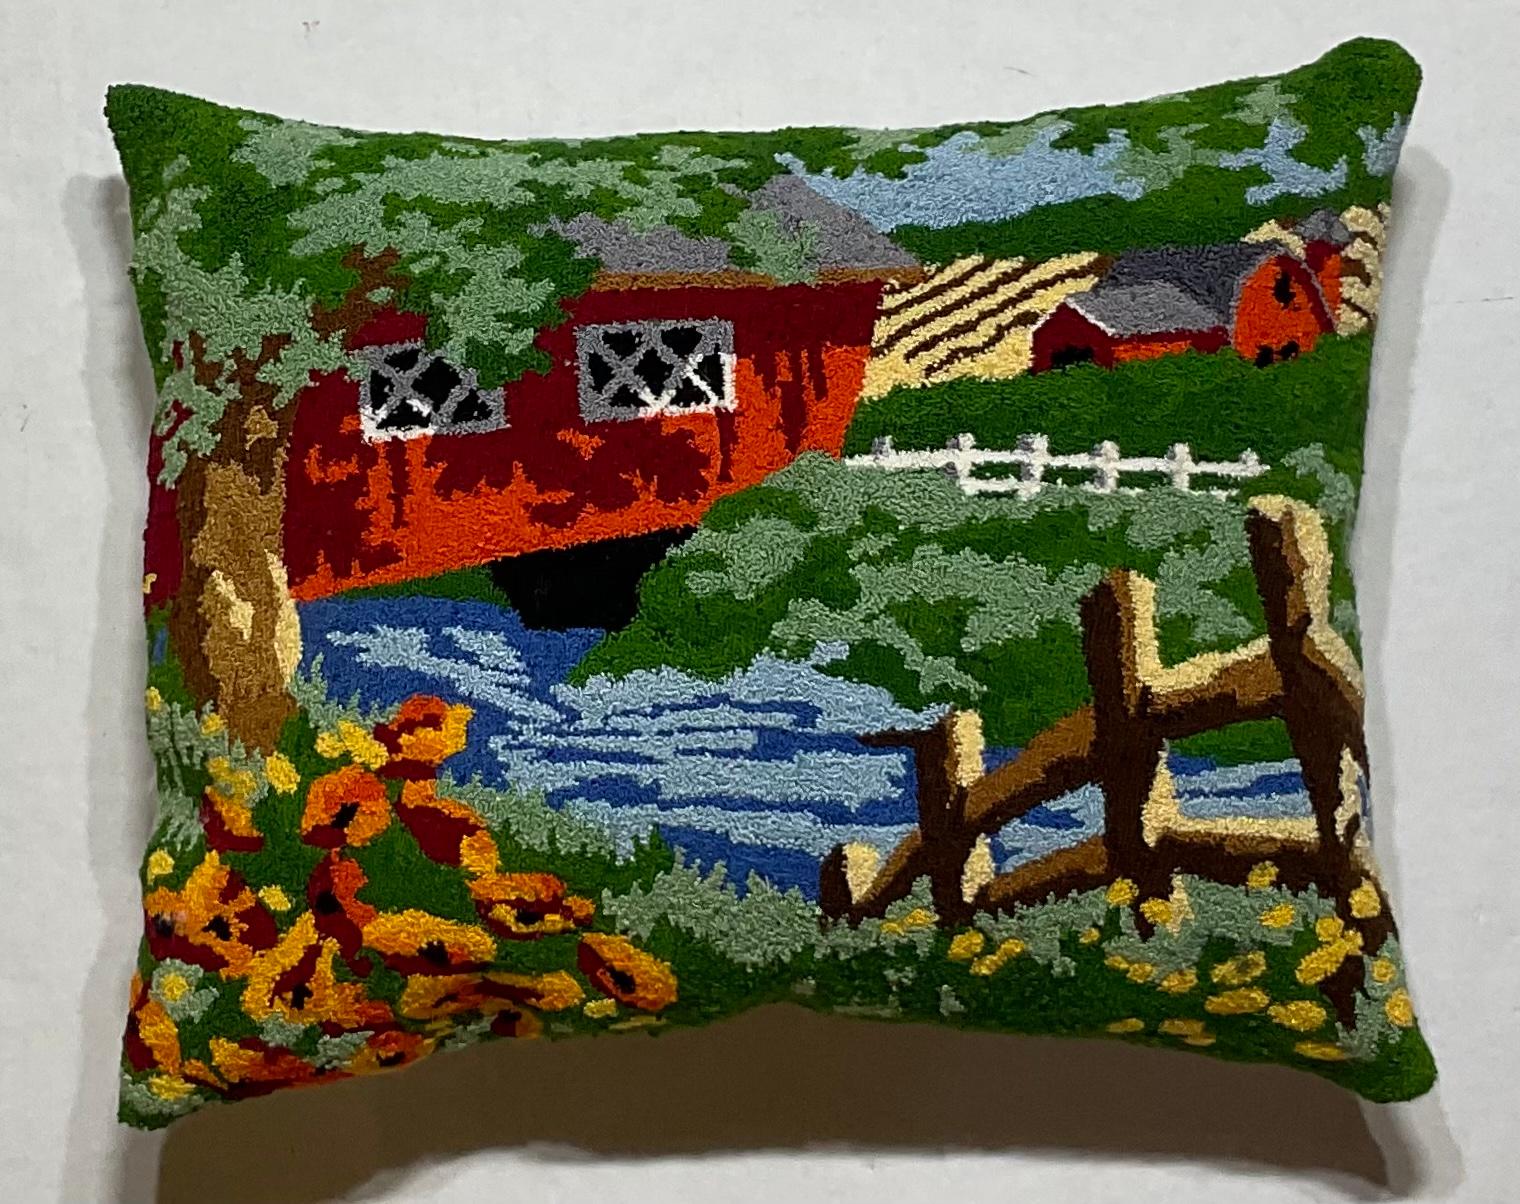 Elegant pillow tightly hand embroidered of a vivid landscape scenery, beautiful colors.
Fresh insert, quality cotton backing.